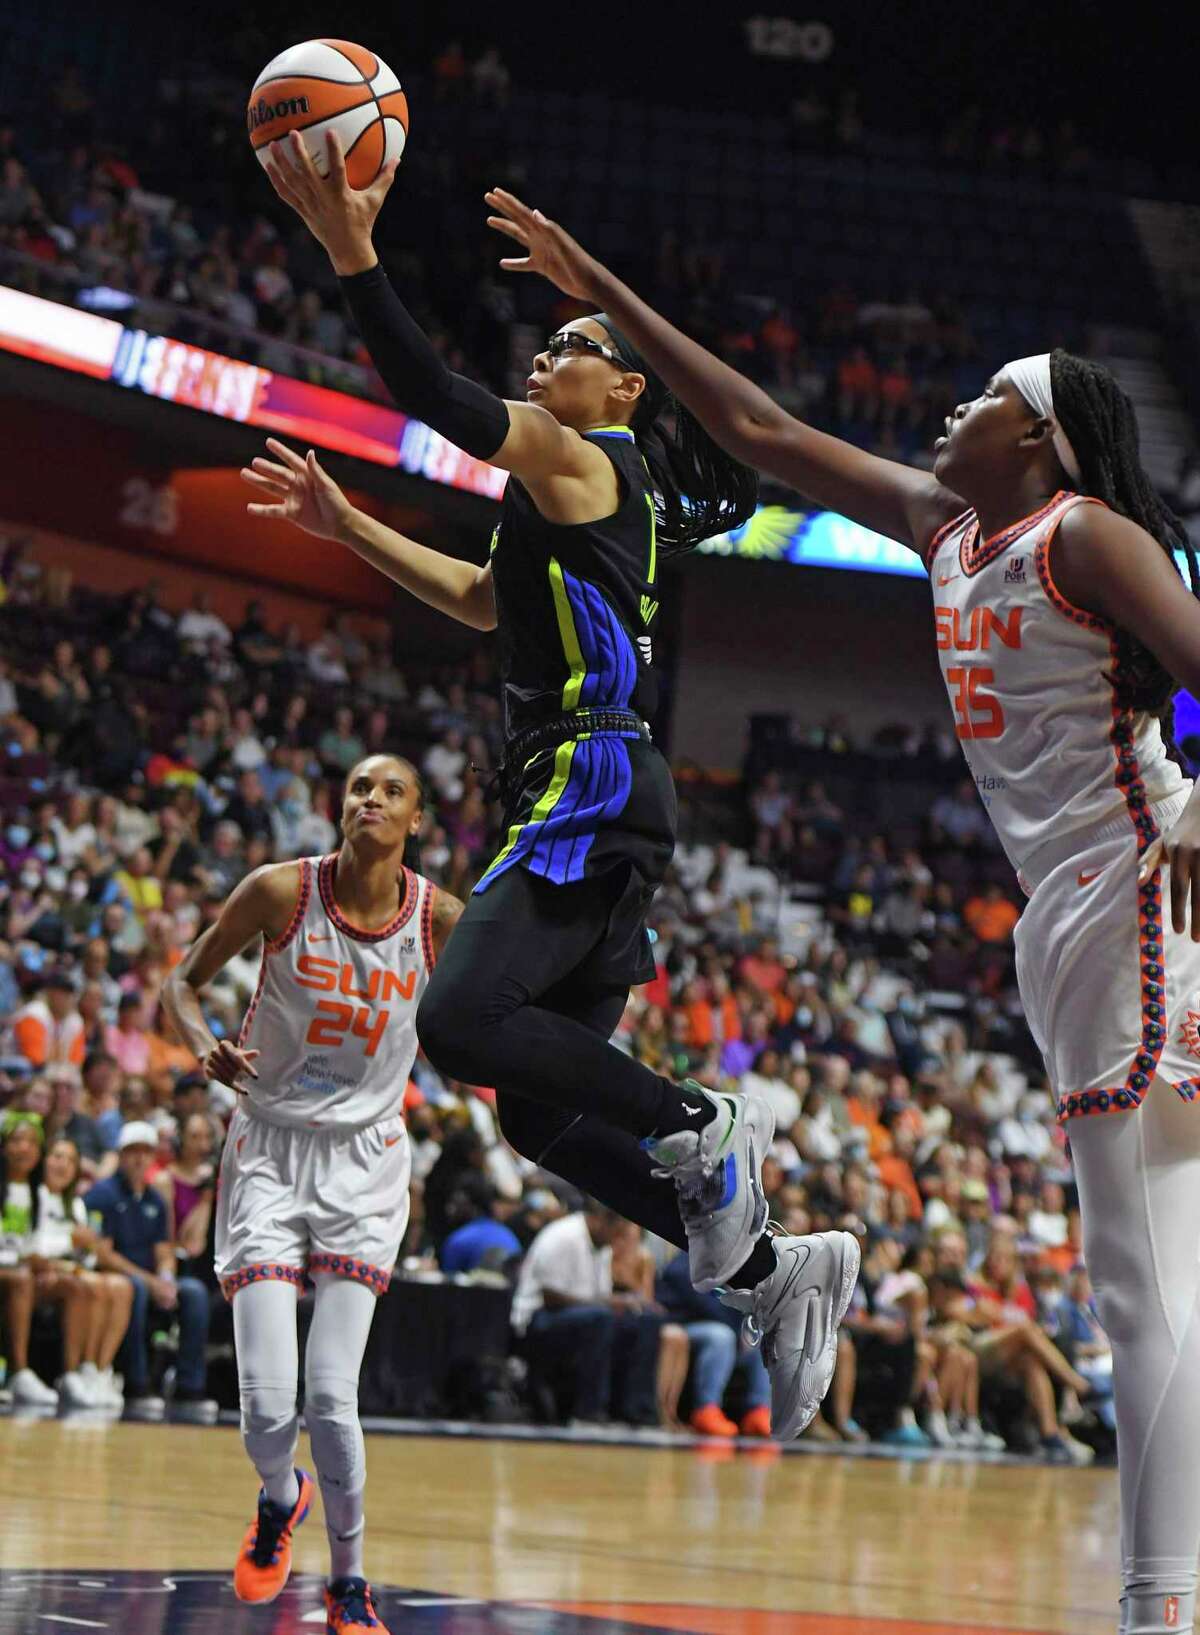 Dallas Wings guard Allisha Gray, center, drives between Connecticut Sunn defenders Jonquel Jones (35) and DeWanna Bonner (24) during Game 2 of a WNBA basketball first-round playoff series Sunday, Aug. 21, 2022, in Uncasville, Conn. (Sean D. Elliot/The Day via AP)